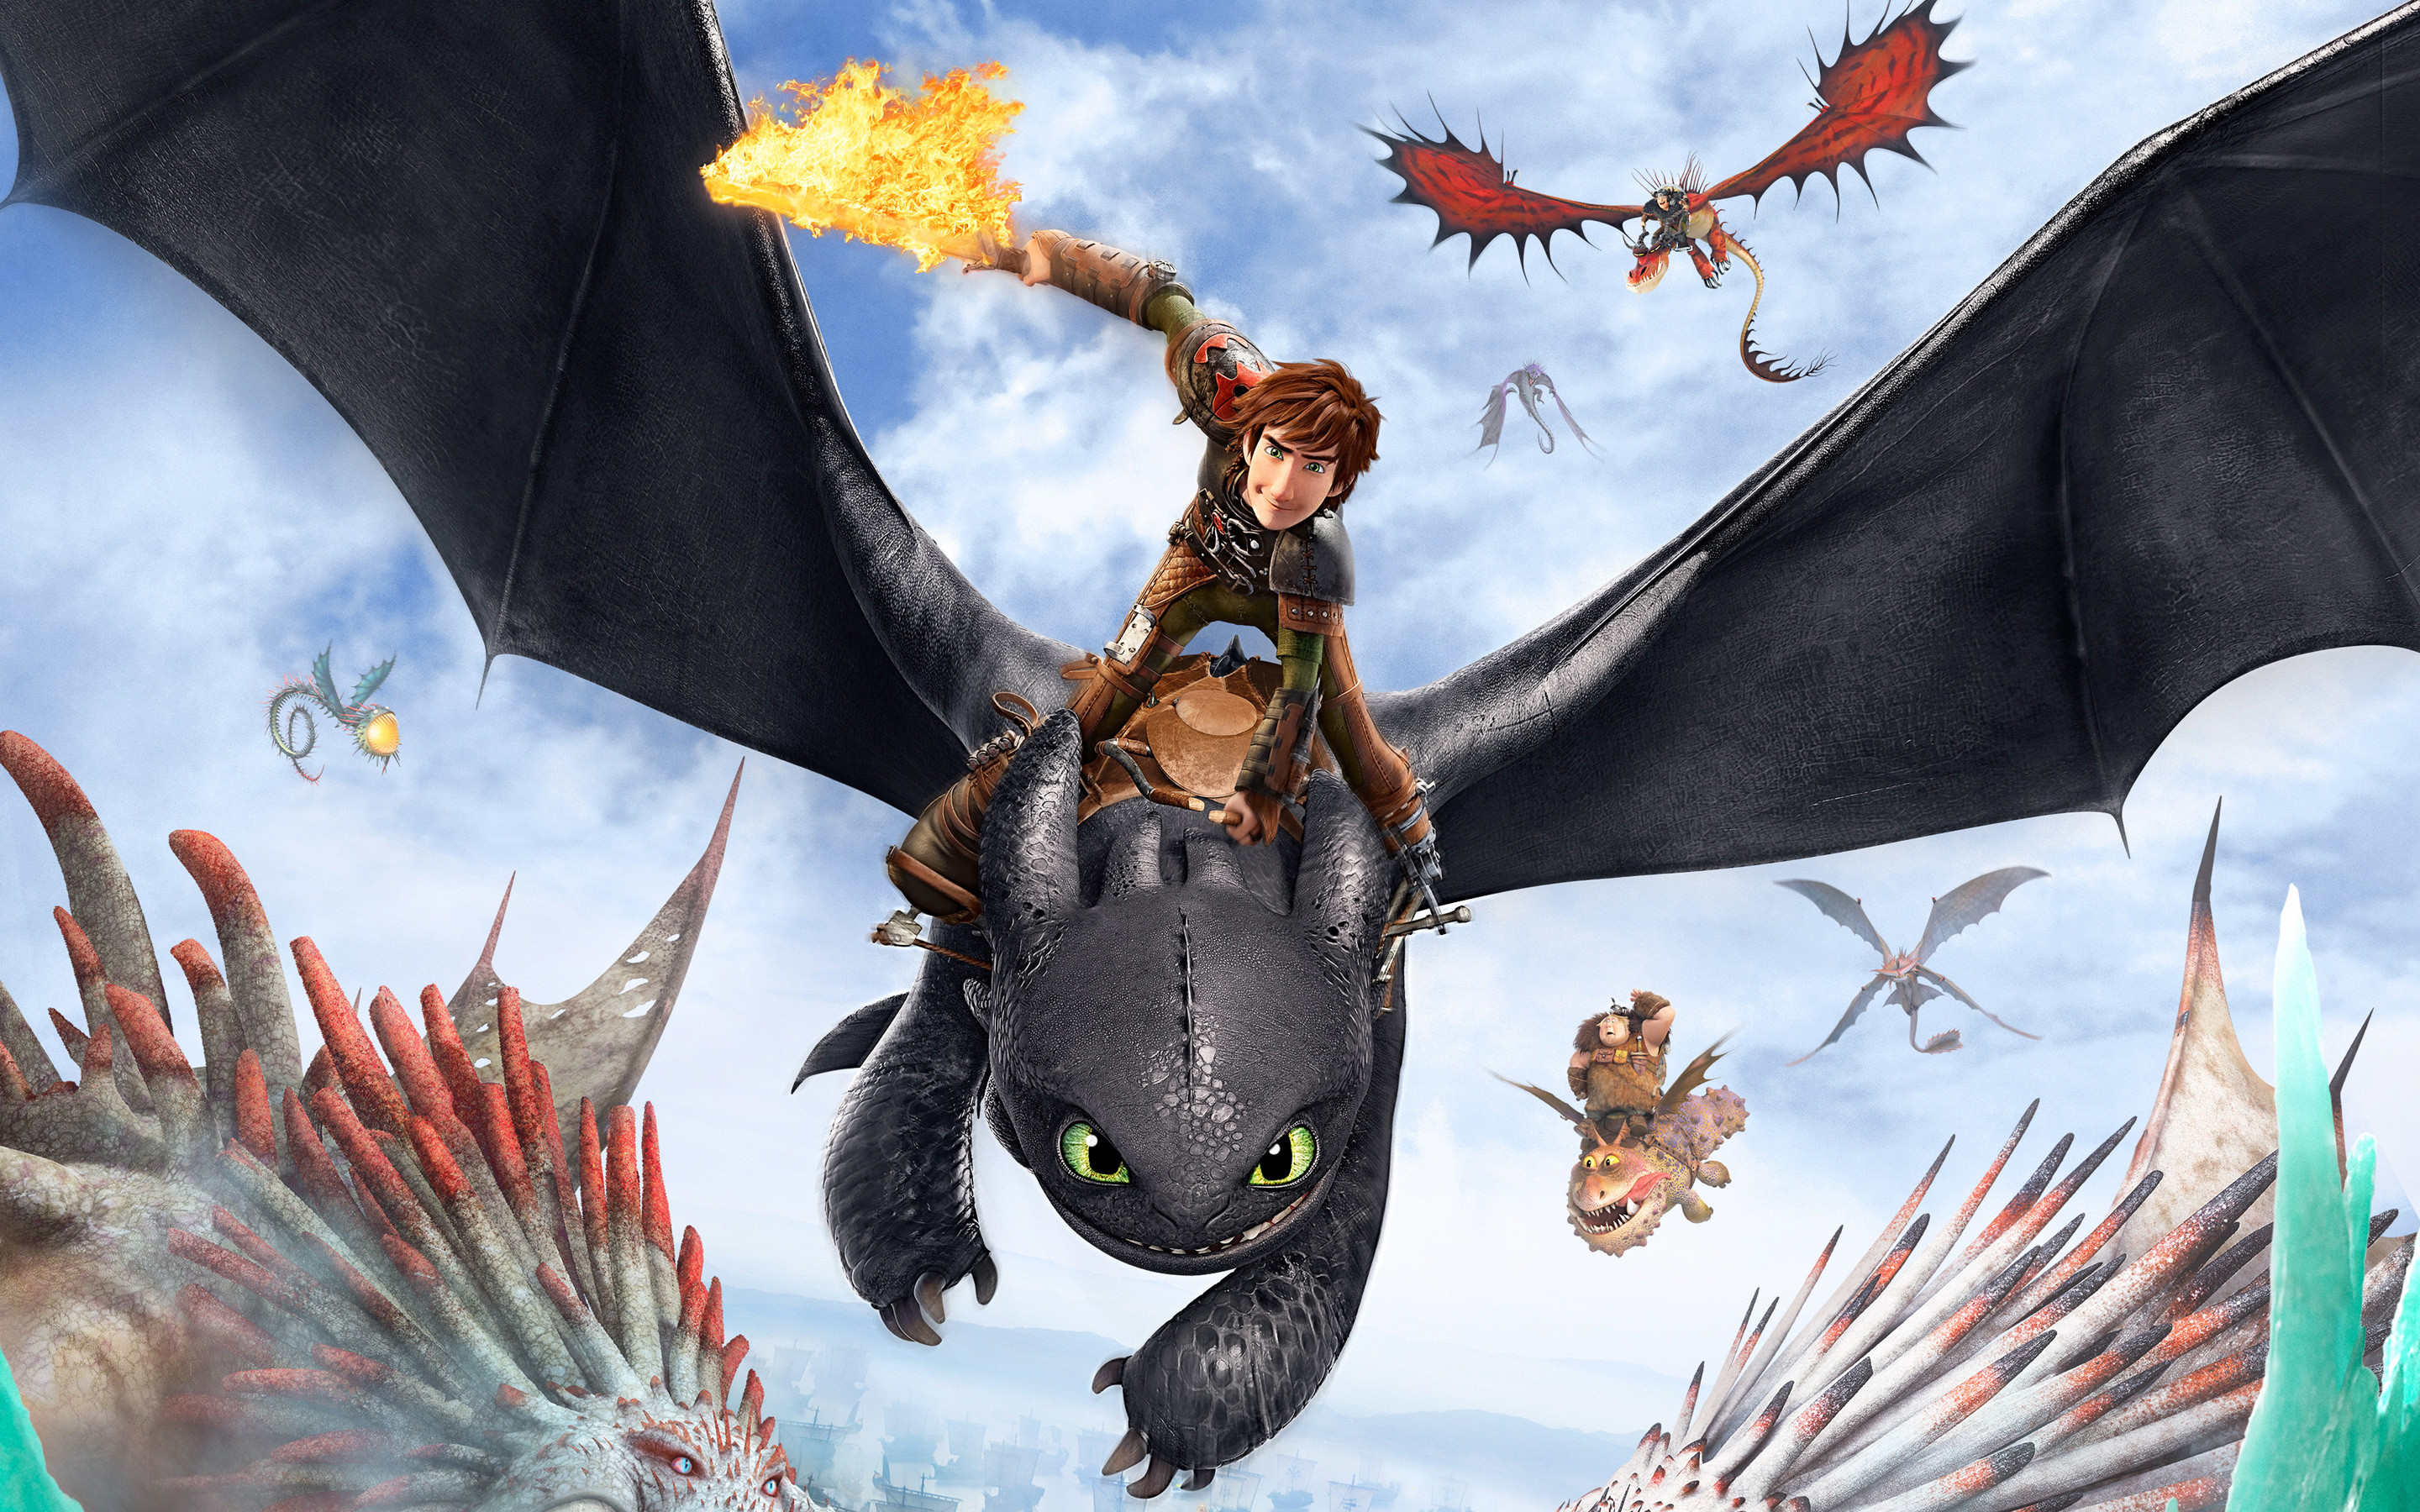 2880x1800 New How To Train Your Dragon Images for Desktop: 04/07/2017